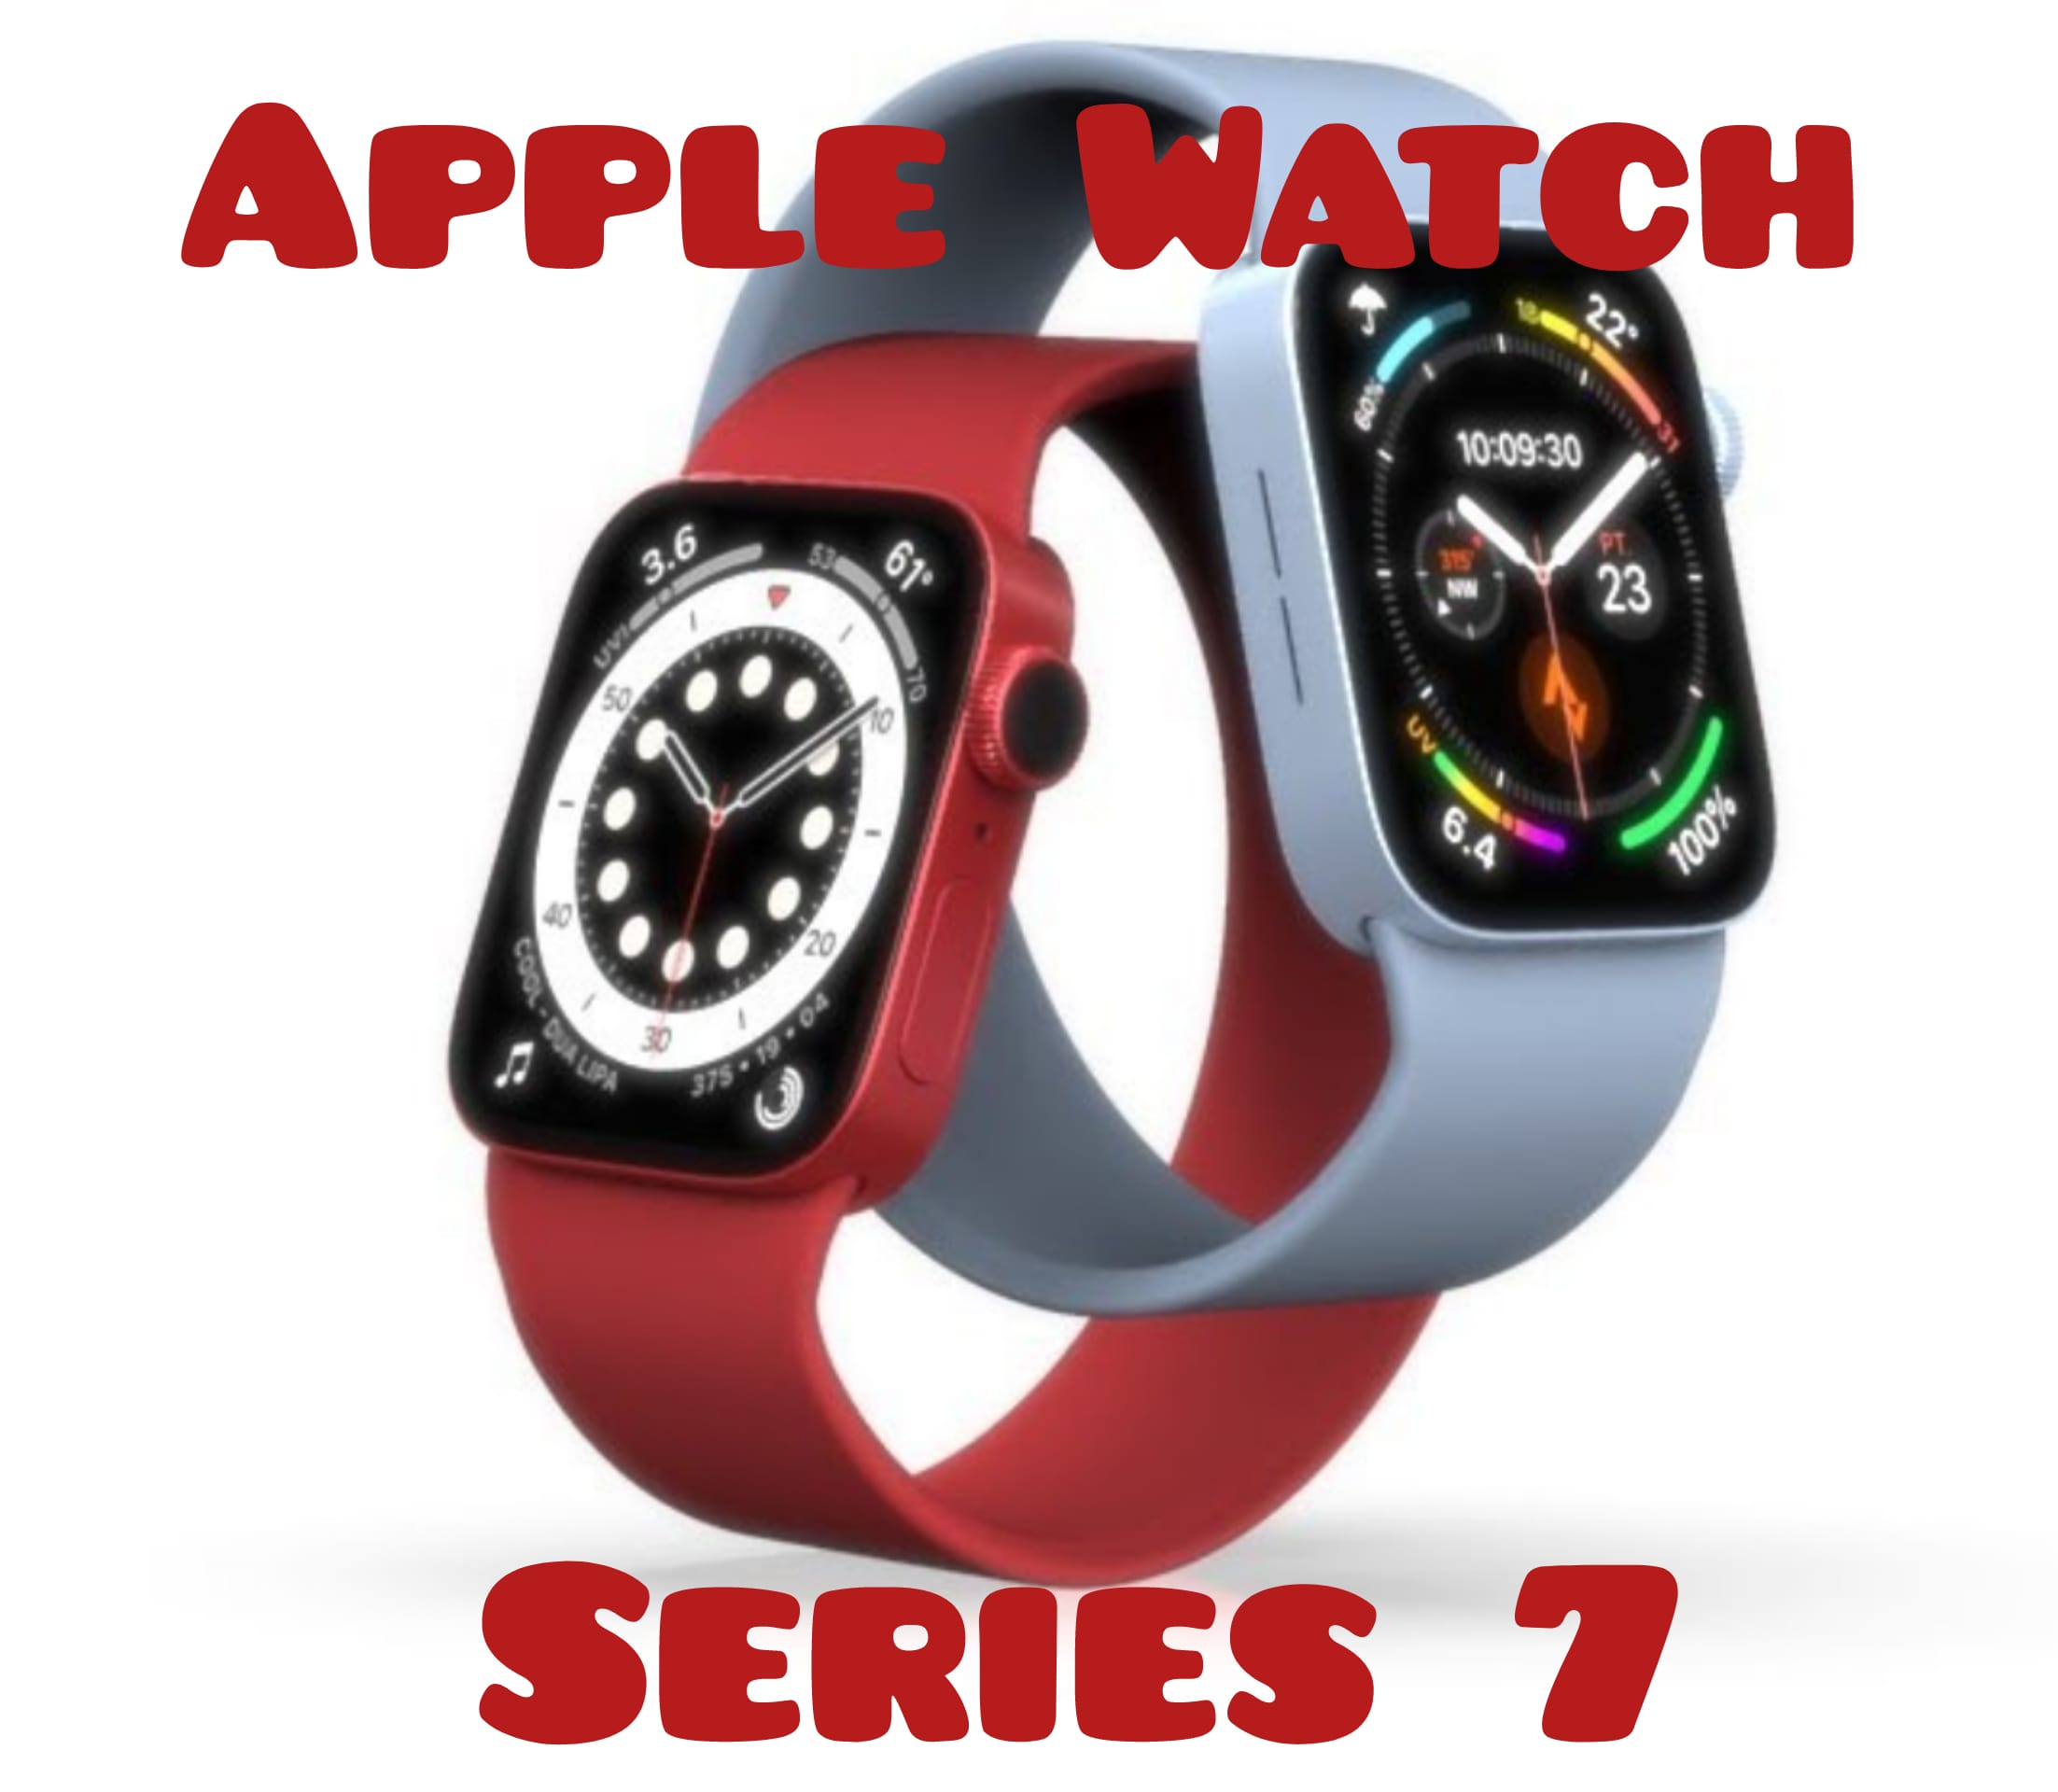 Apple Watch series 7 release date and price